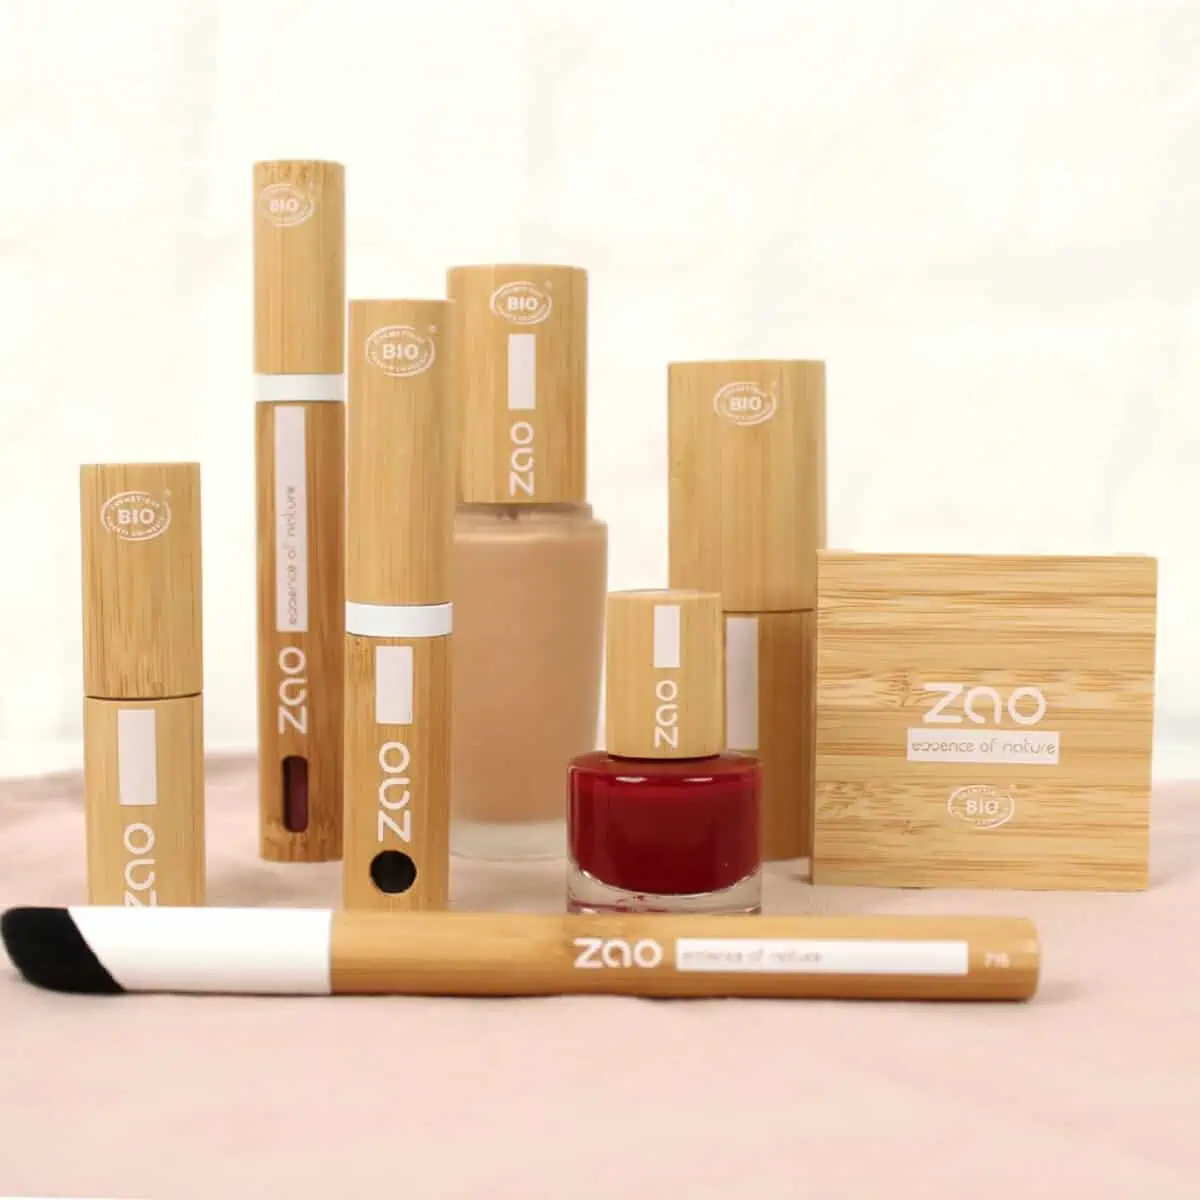 A collection of eight vegan and cruelty-free Zao Makeup products in bamboo wood containers in various sizes and shapes on a surface against white background.